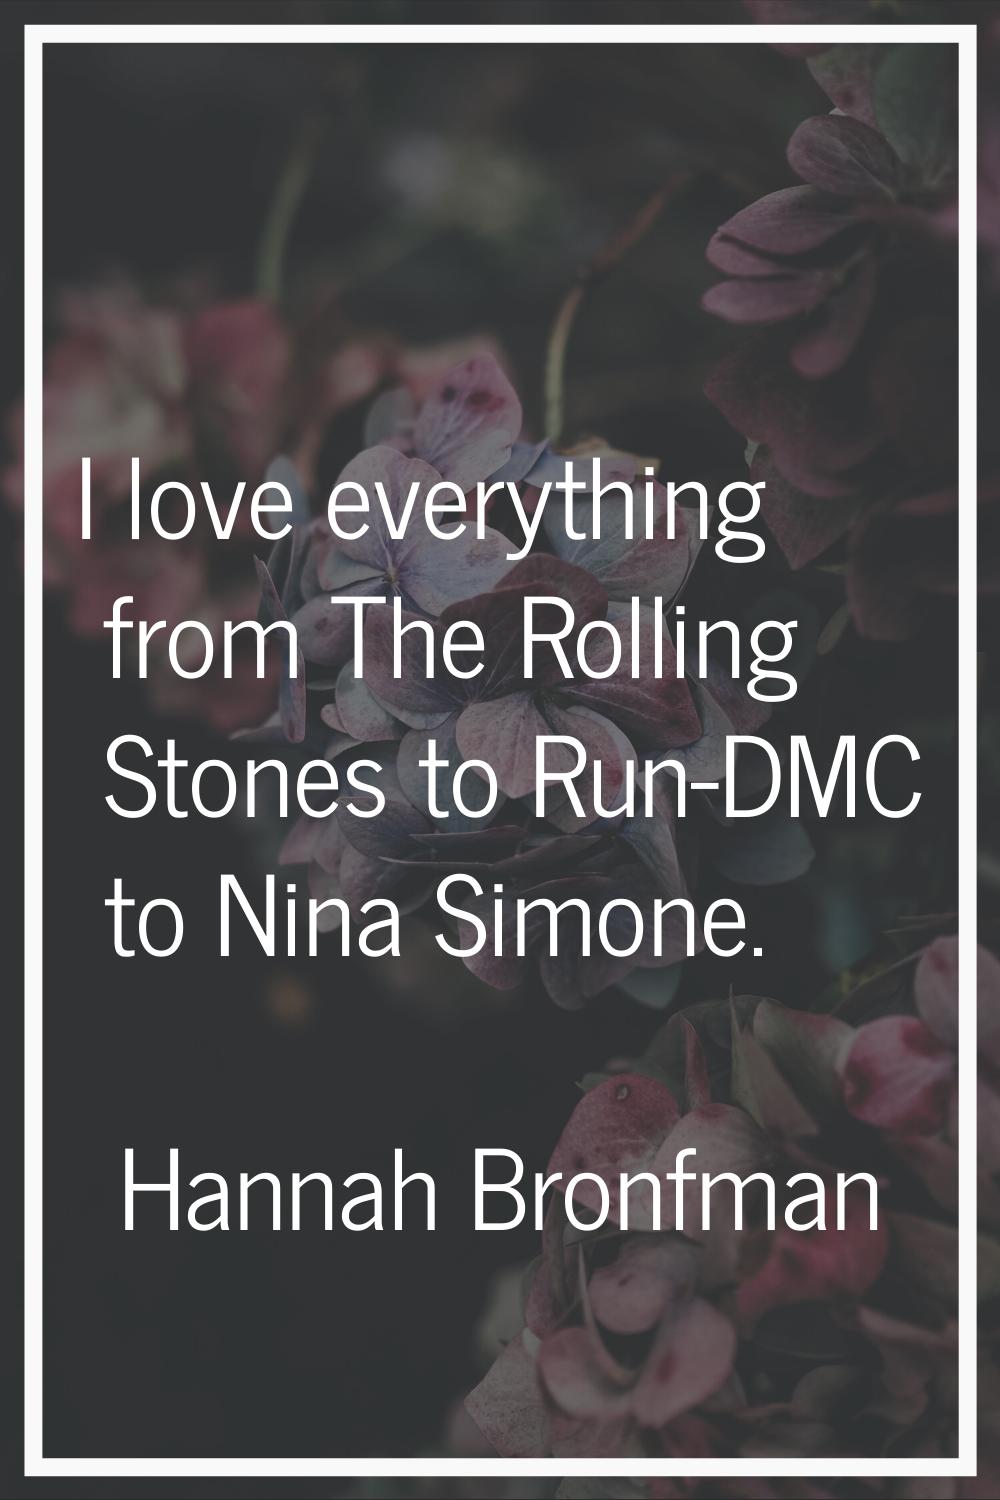 I love everything from The Rolling Stones to Run-DMC to Nina Simone.